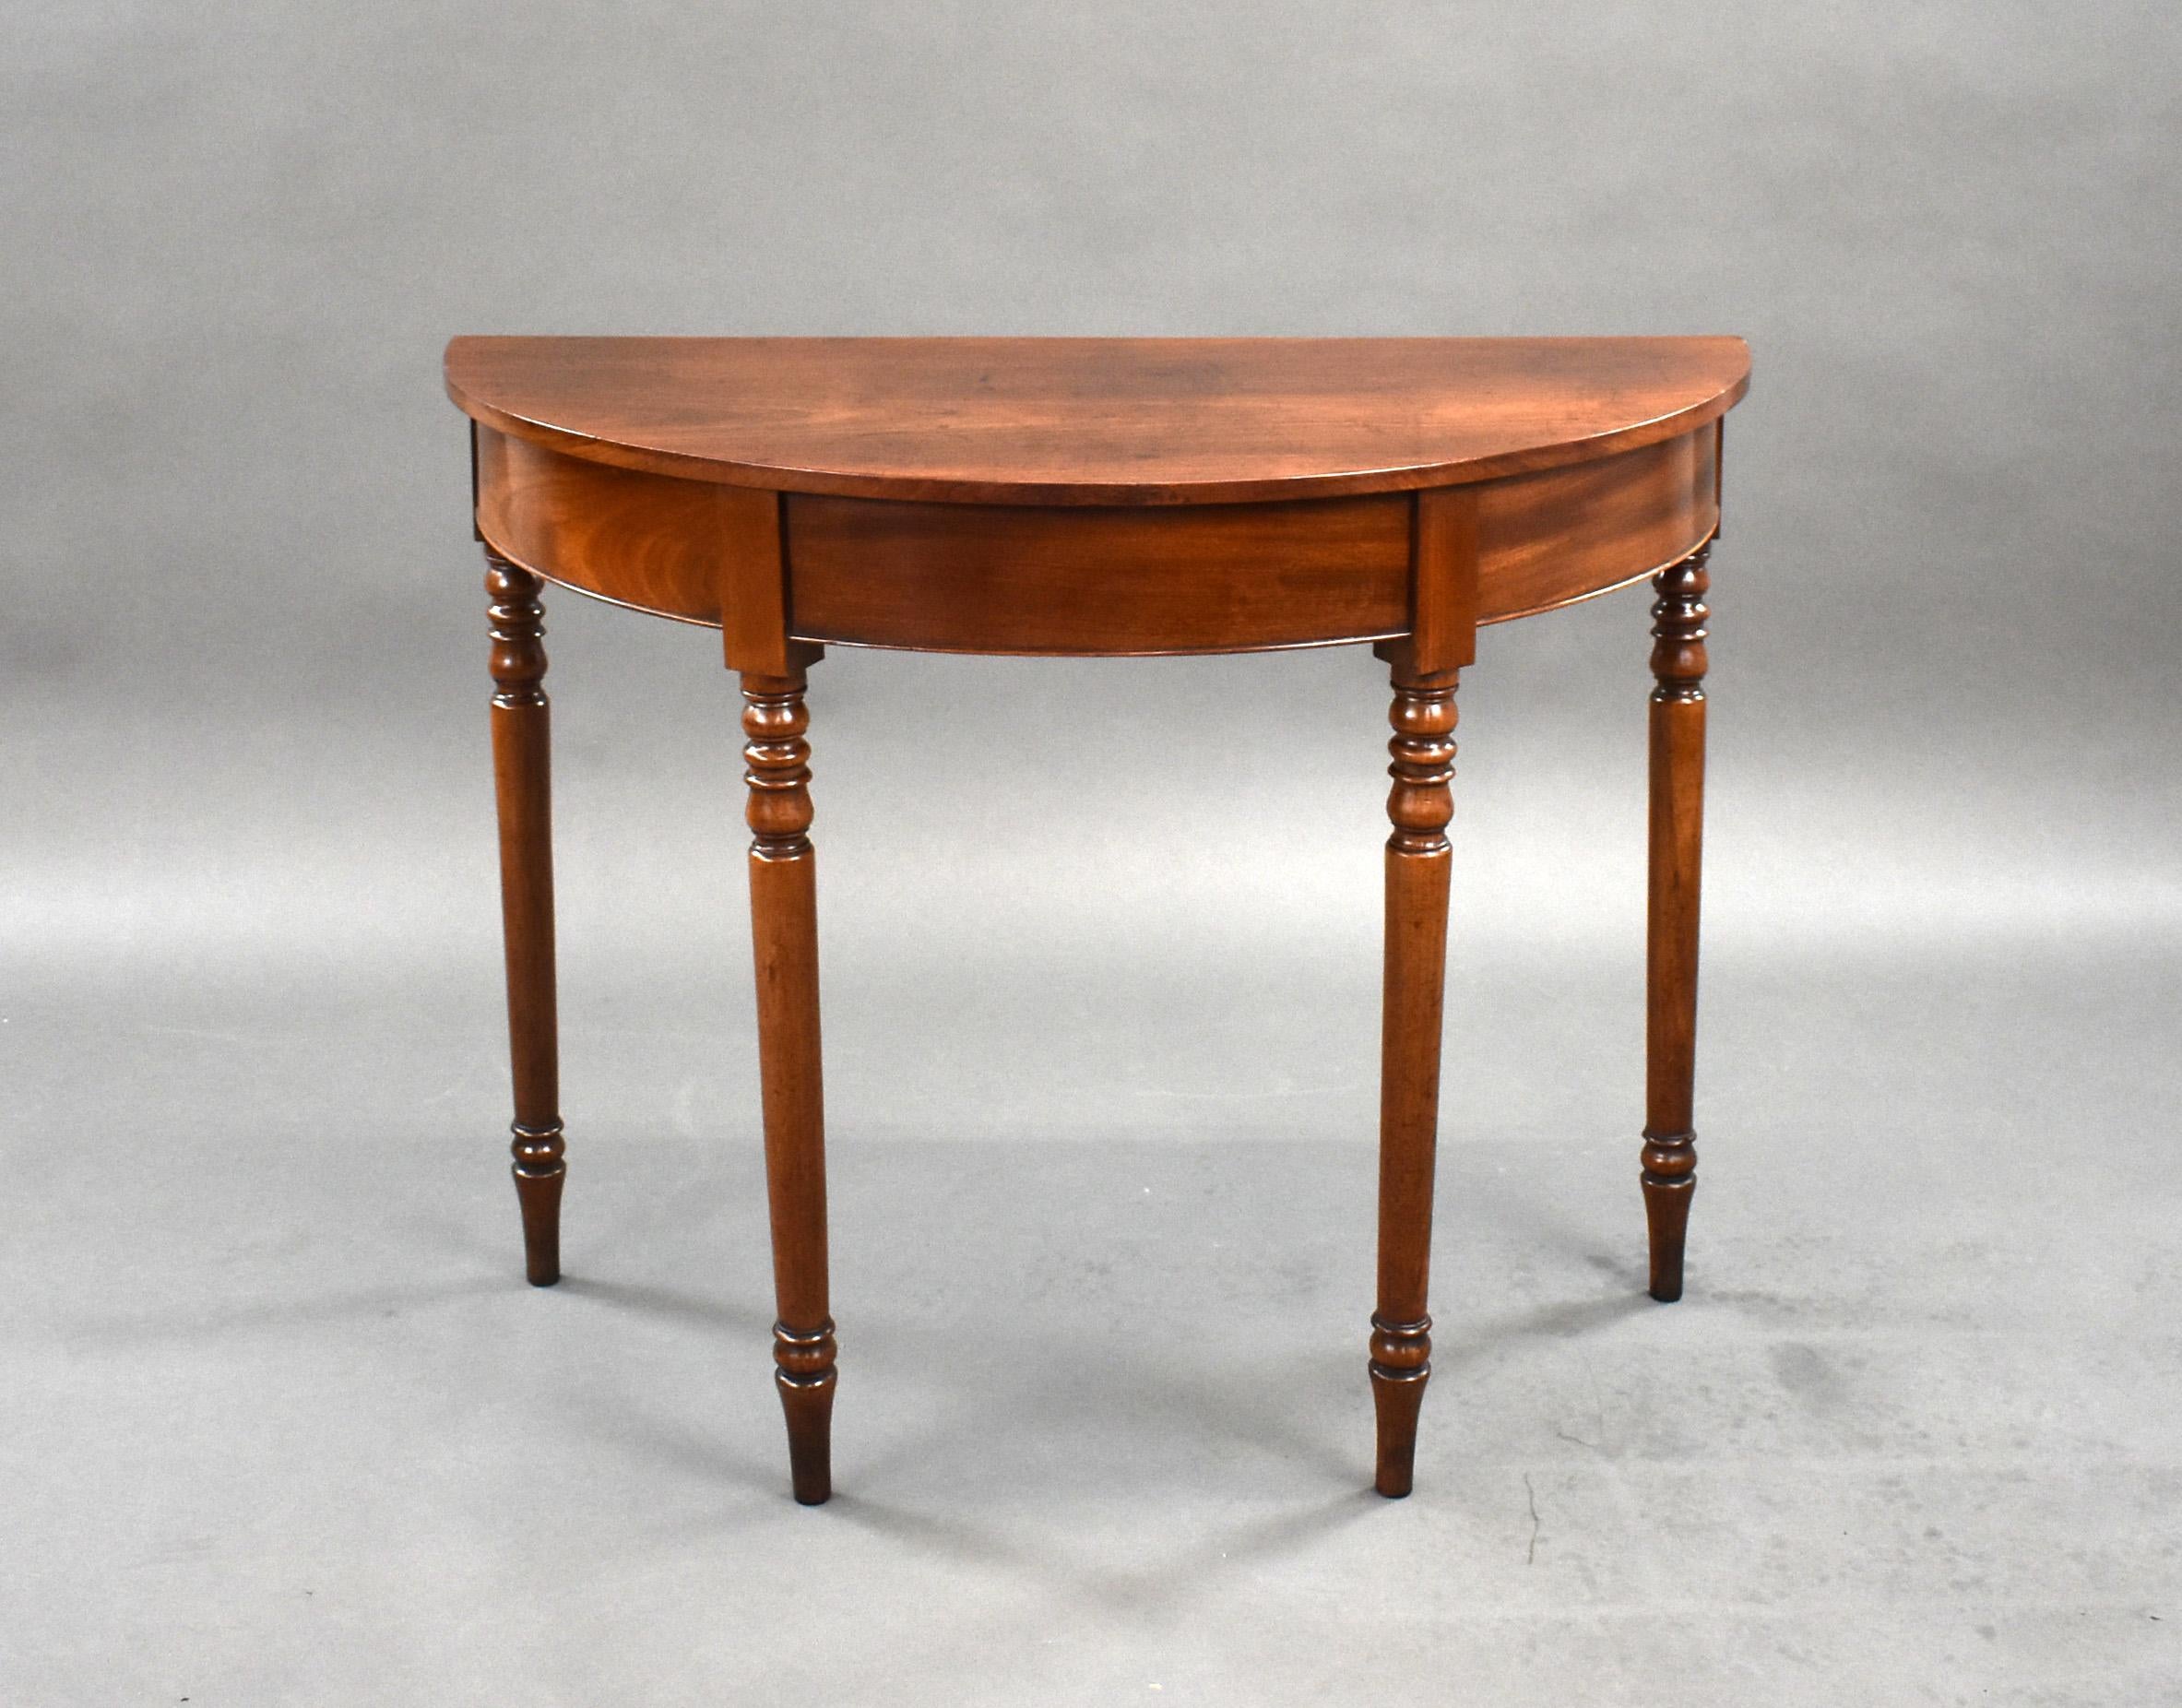 For sale is a good quality George III mahogany demi lune console table, having a well figured top, standing on elegant turned legs, this table remains in very good condition for its age. 

Measures: width: 97cm depth: 48cm height: 76cm.